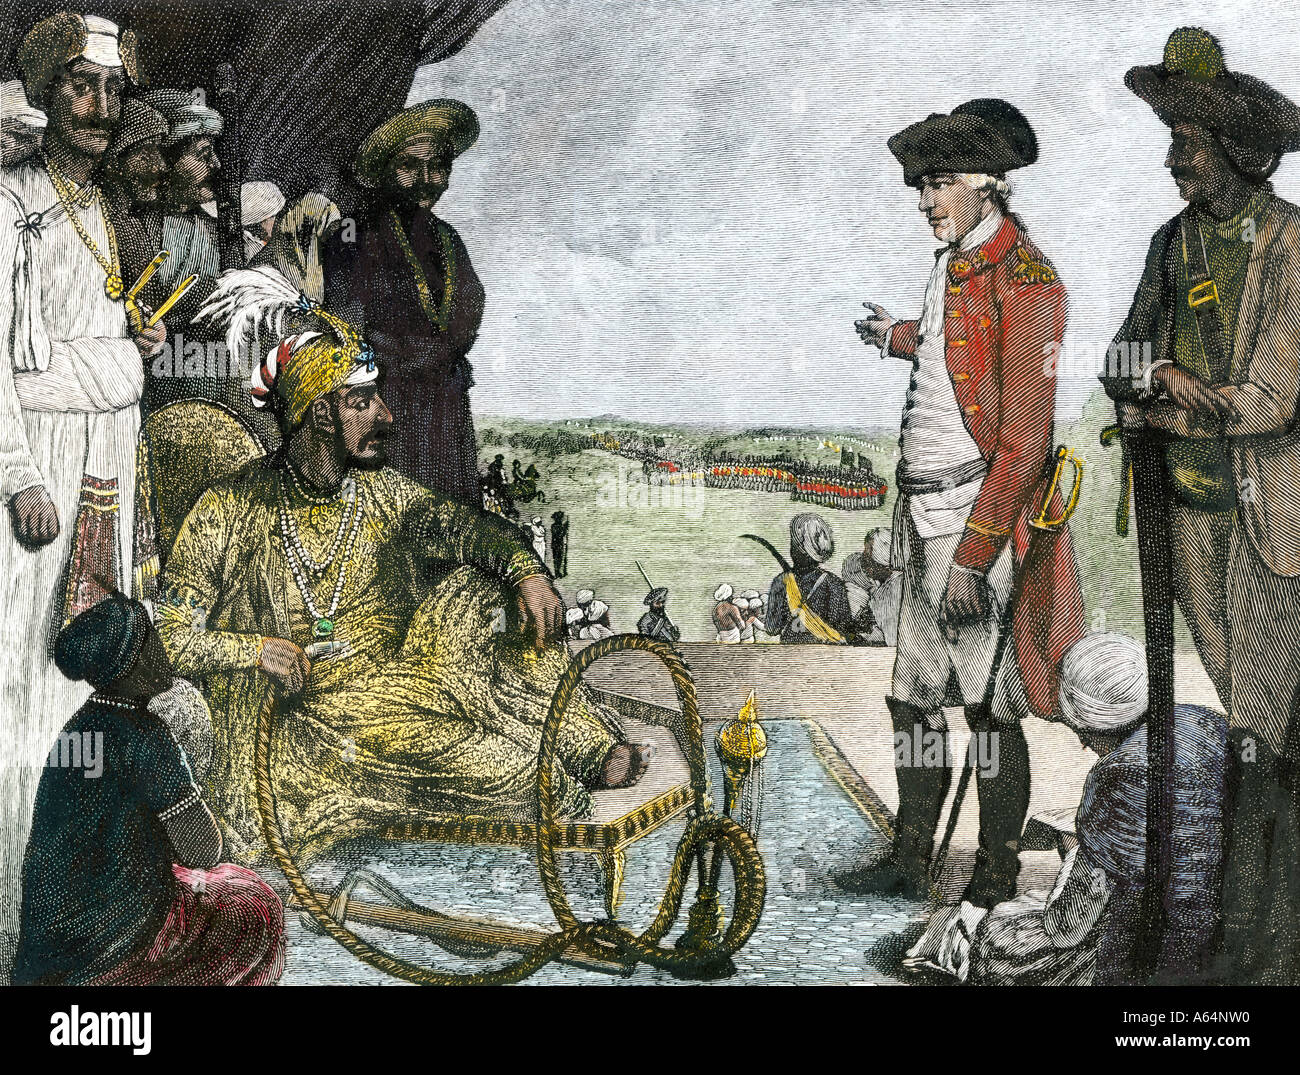 Shah Allum Mogul of Hindostan reviewing troops of the British East India Company 1781. Hand-colored woodcut Stock Photo